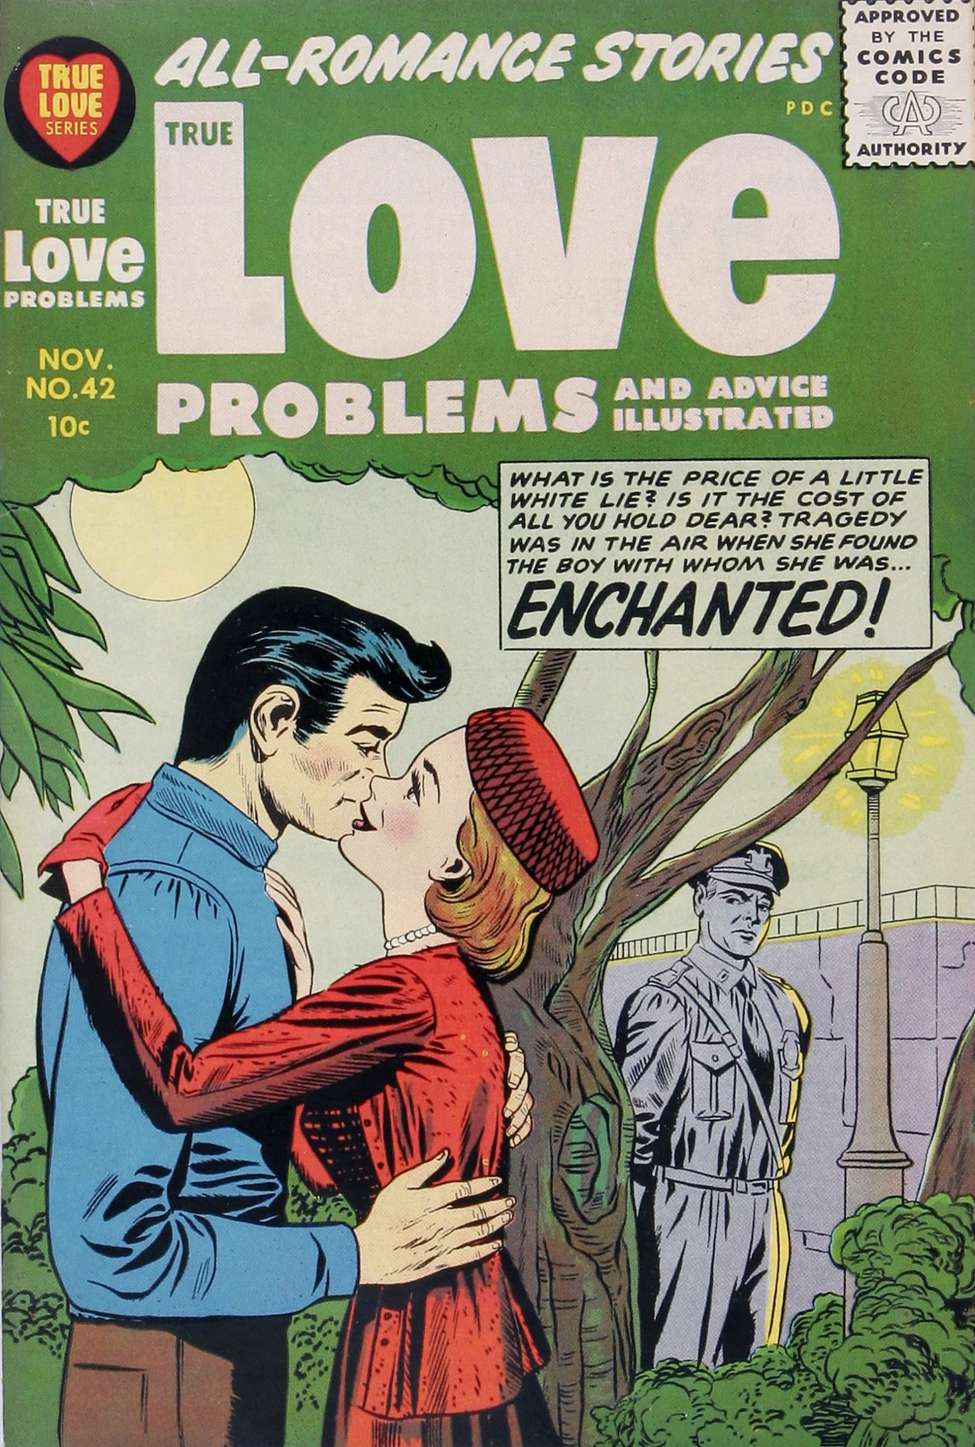 Comic Book Cover For True Love Problems and Advice Illustrated 42